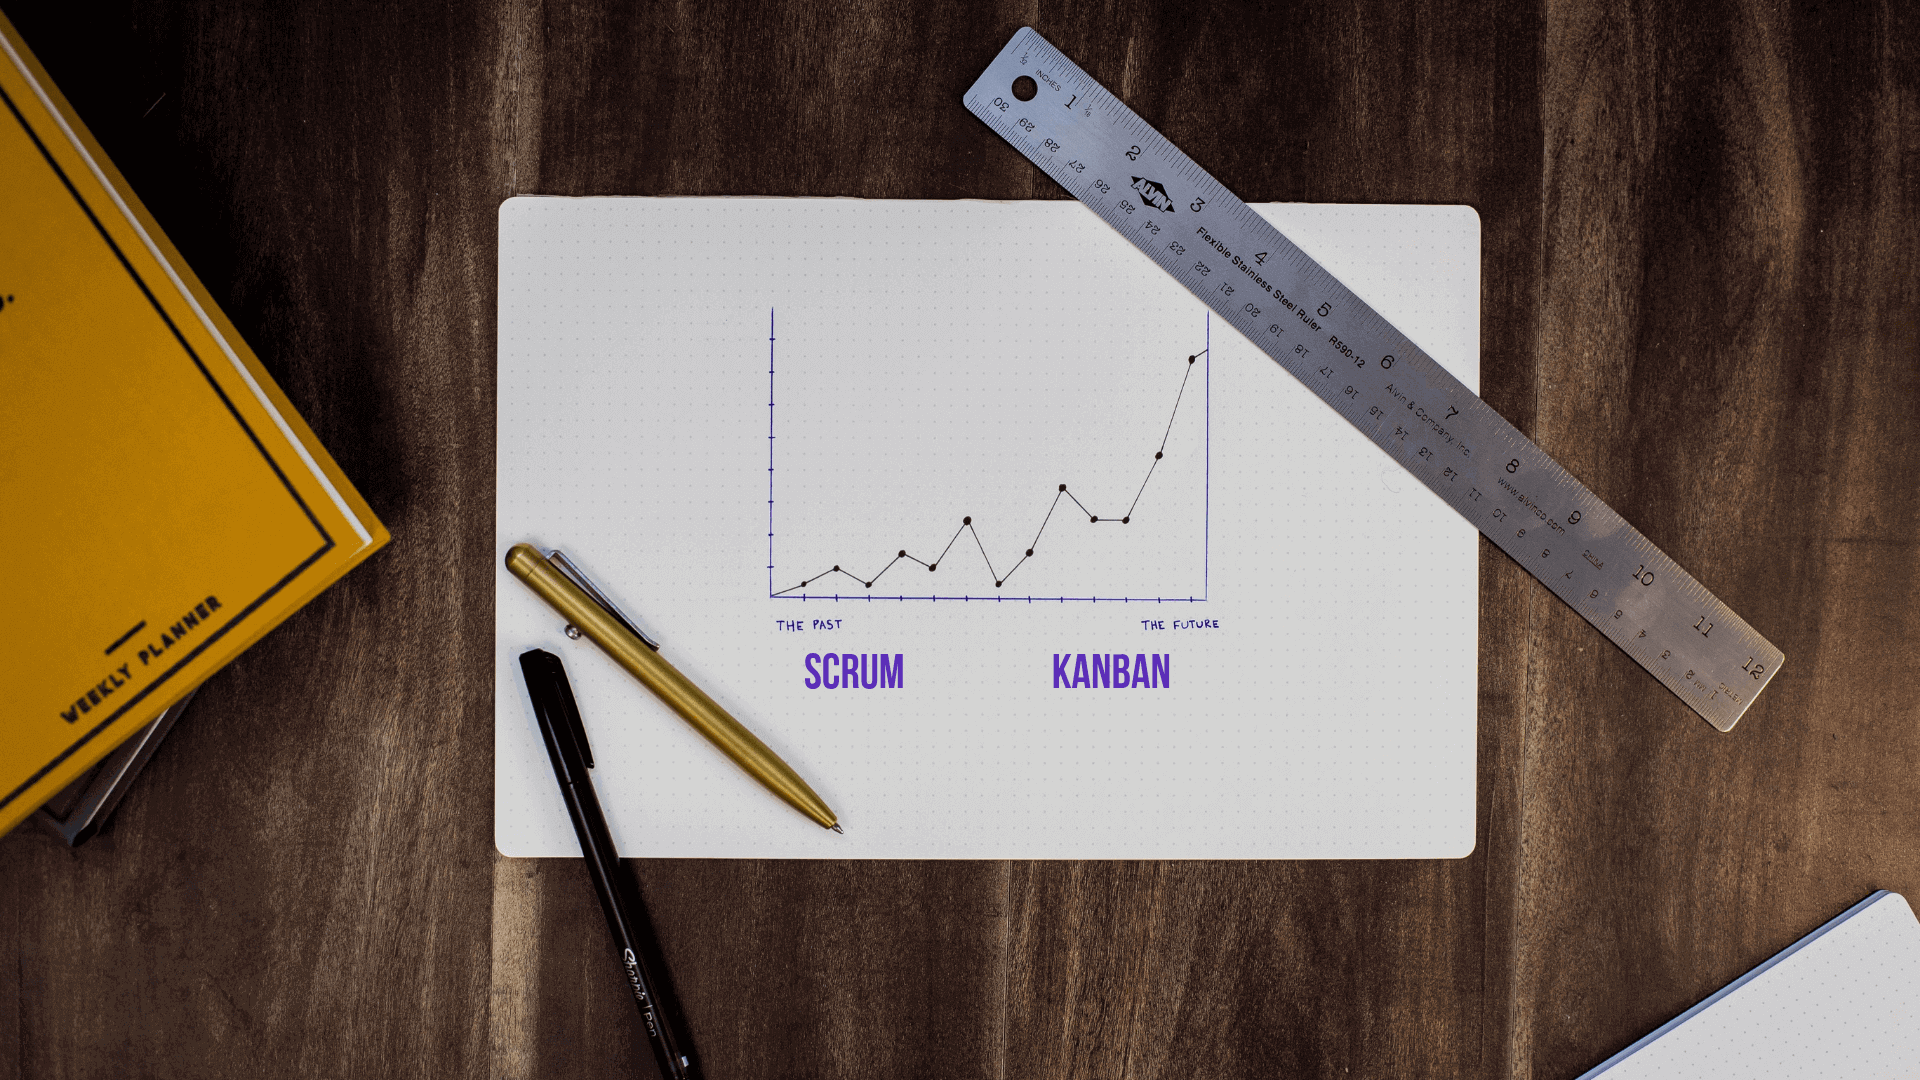 Scrum compares to Kanban as Sprints compare to Marathons. One is optimized for the short-term and the other for the long-term.